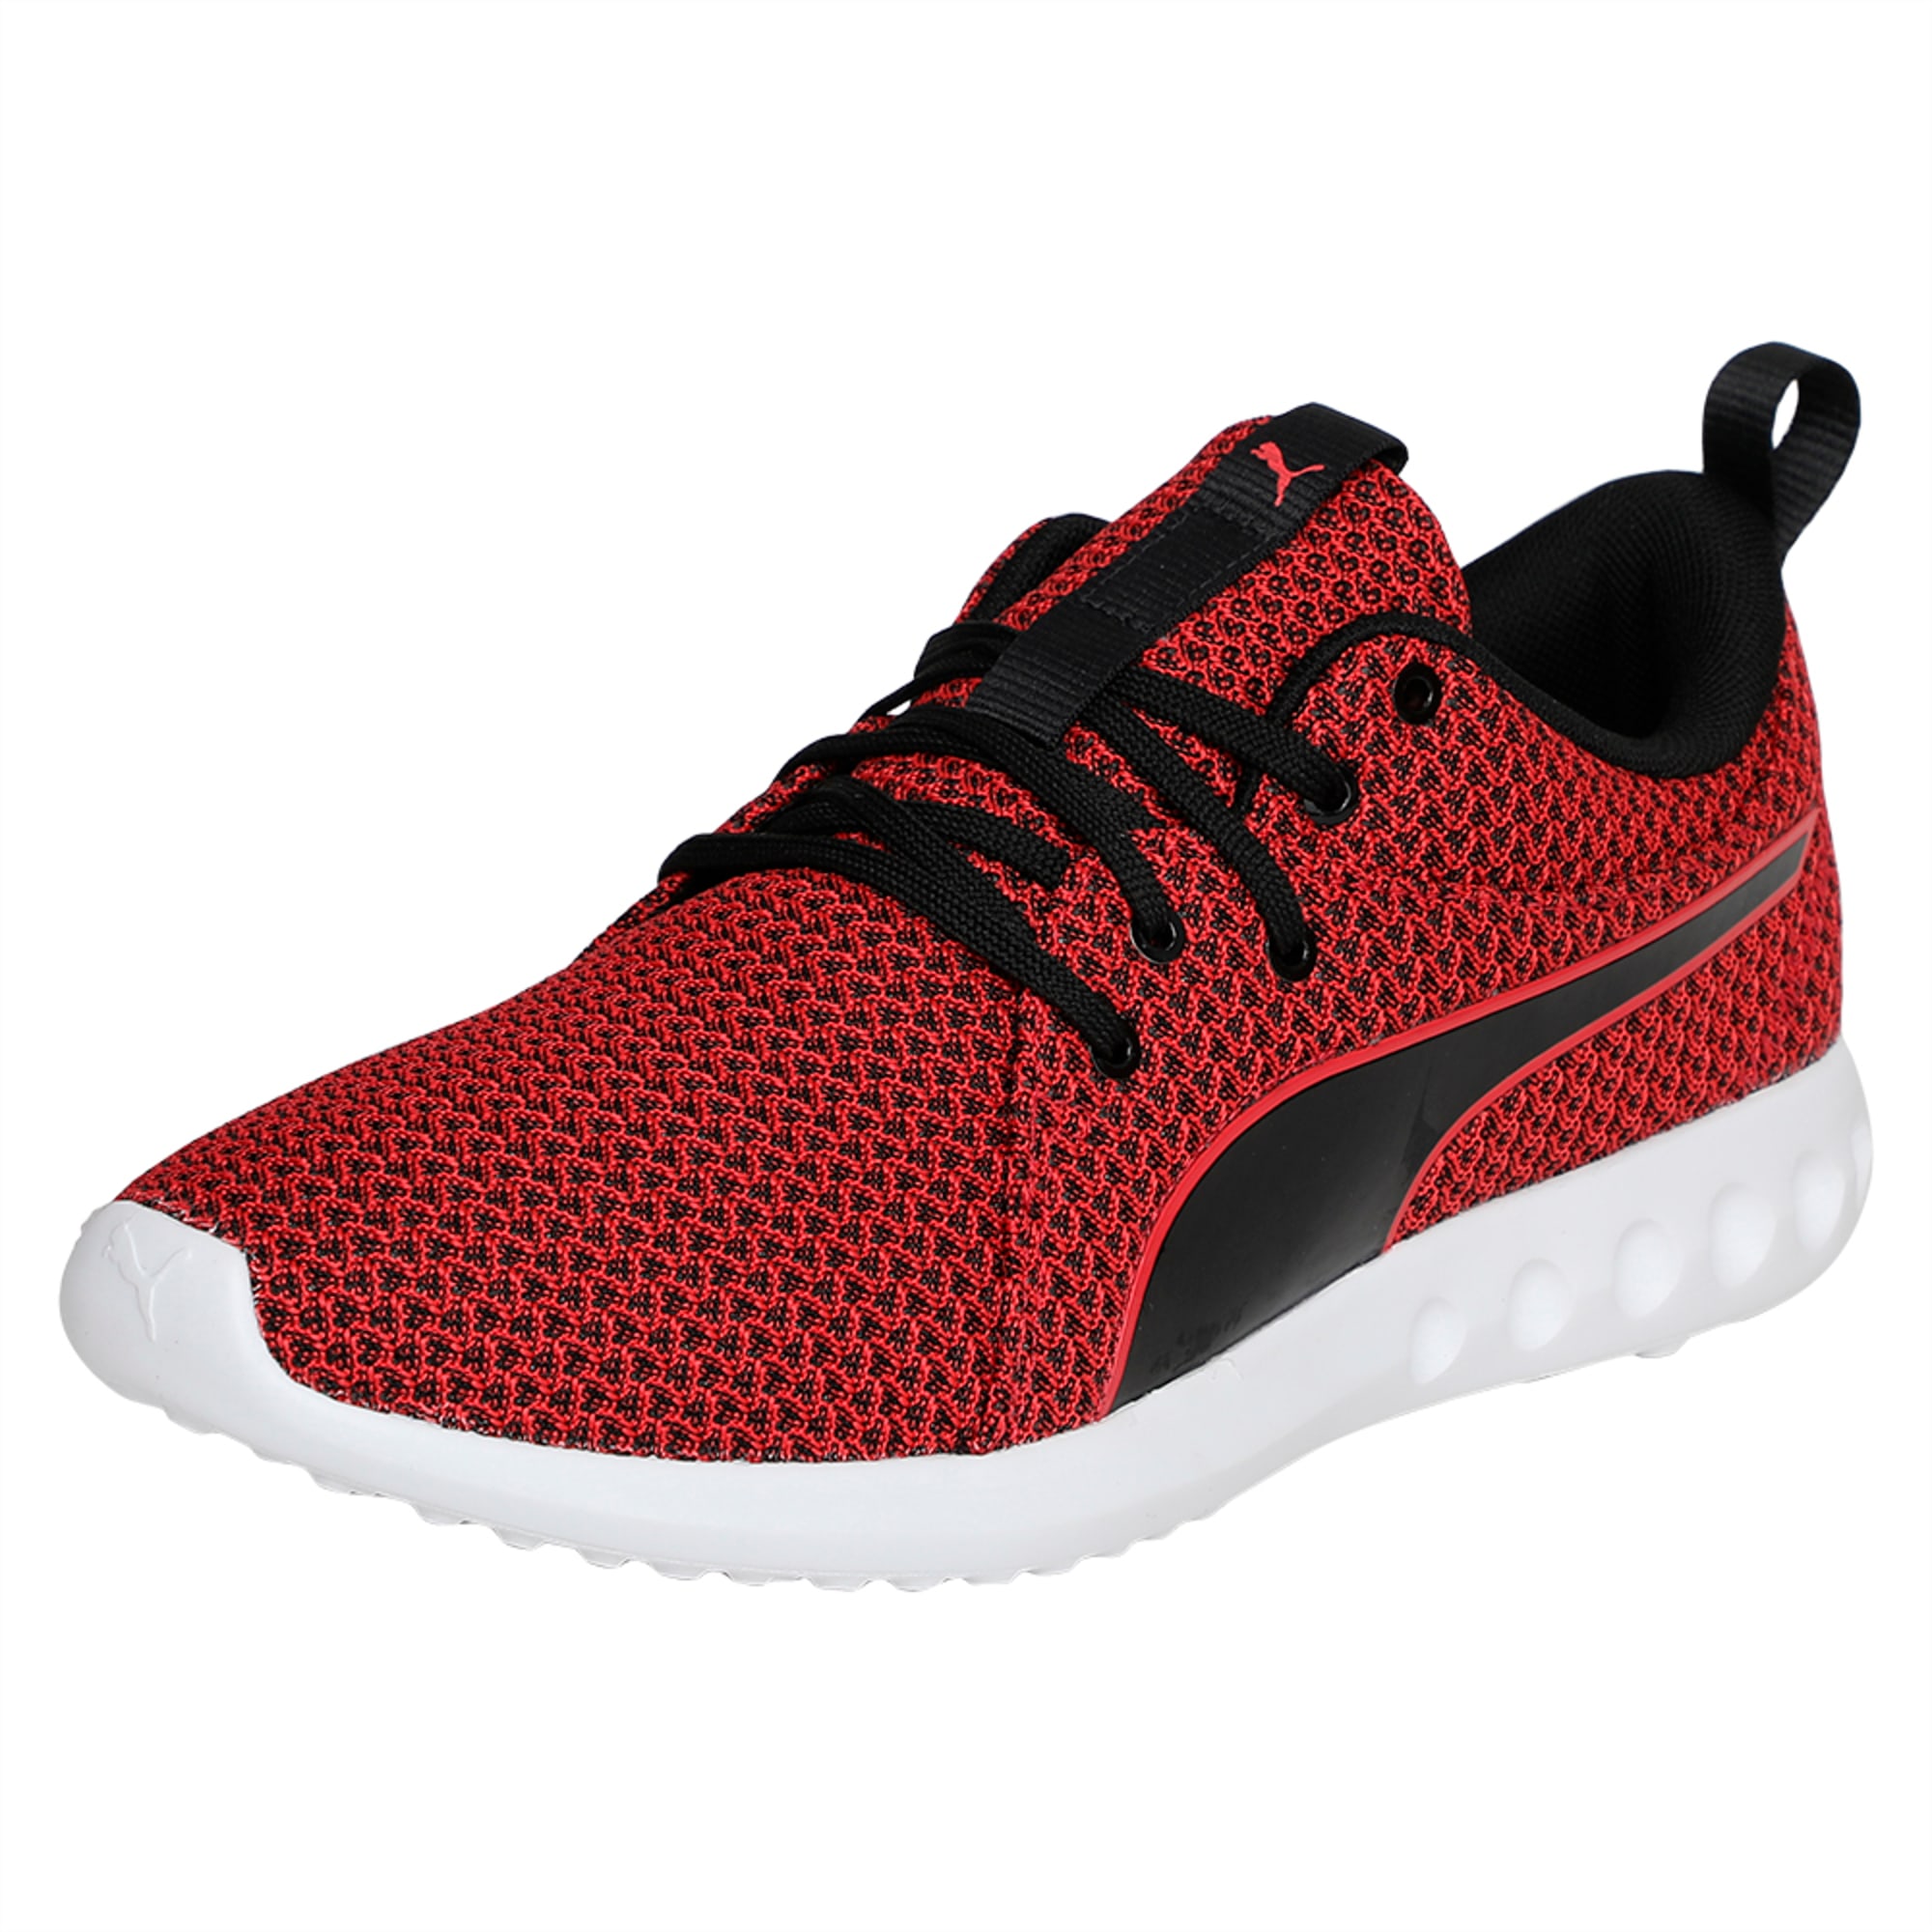 Carson 2 Knit IDP Running Shoes 